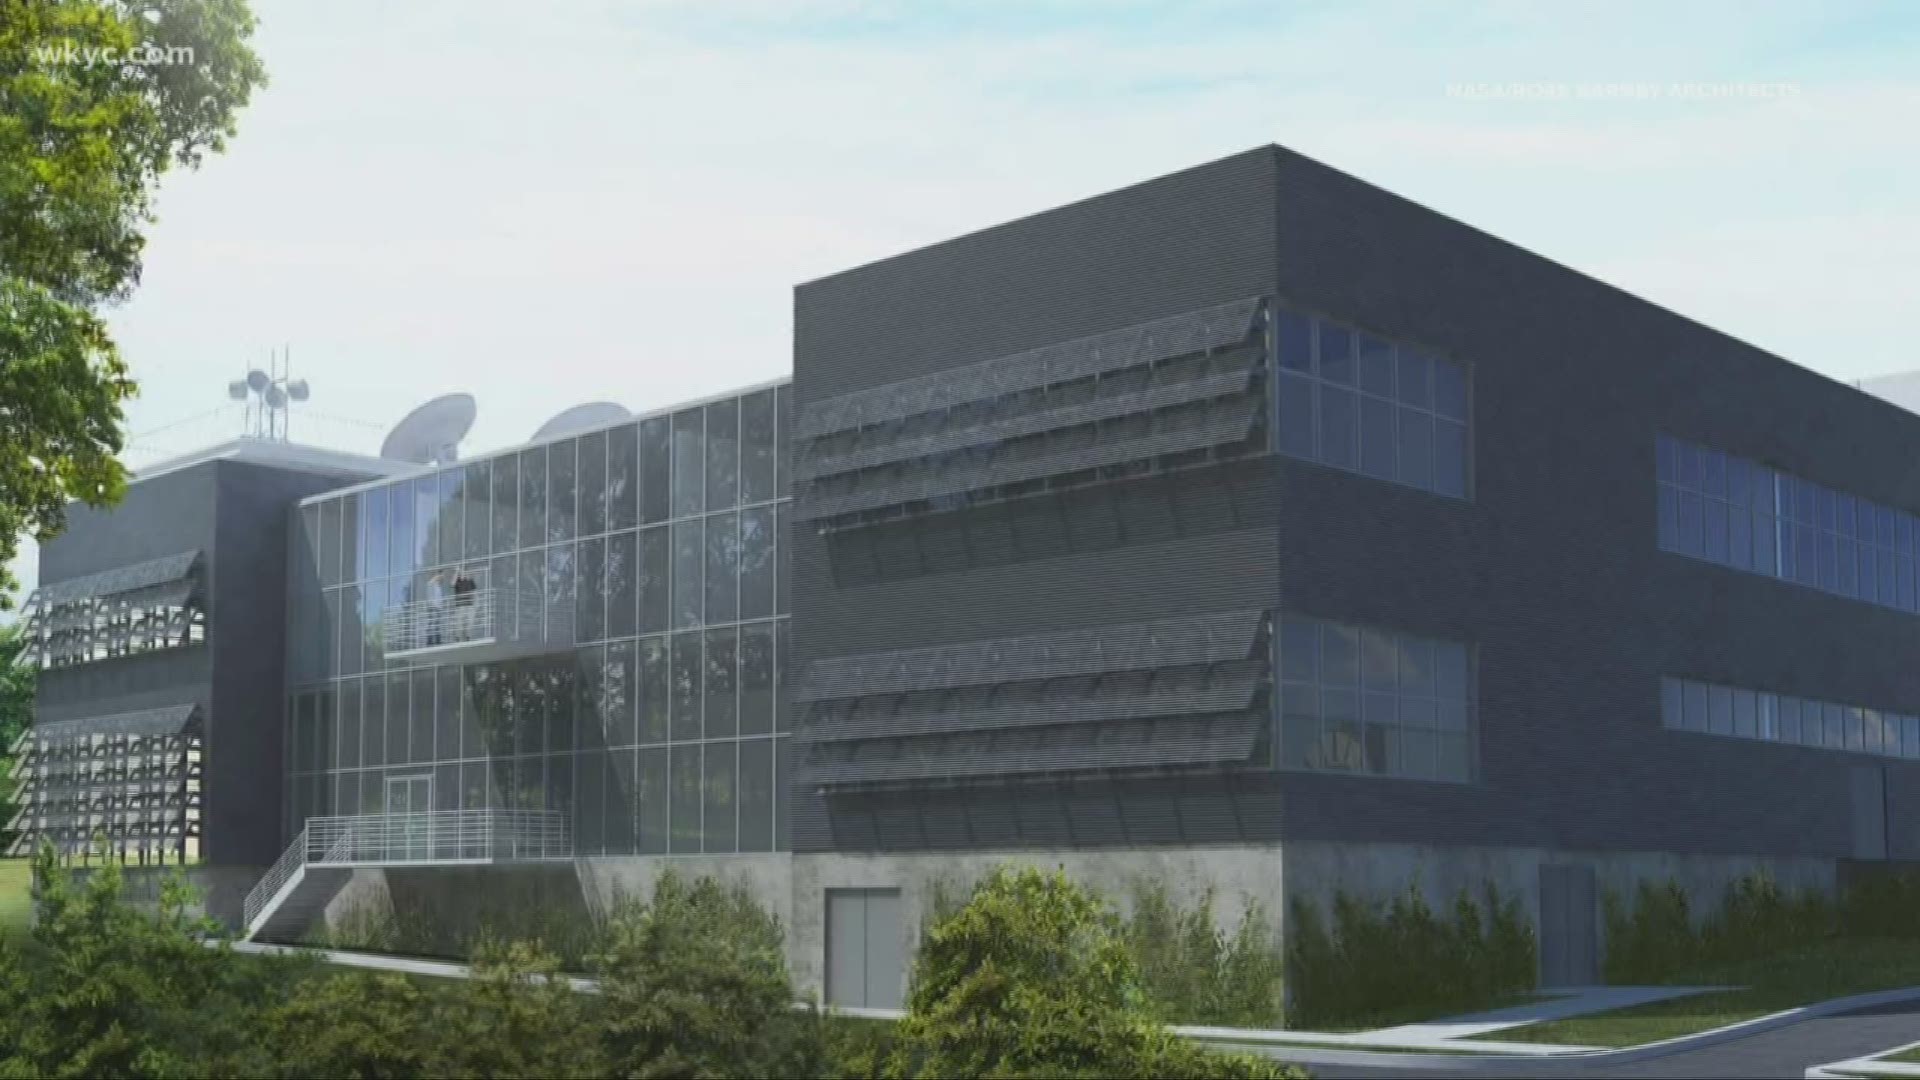 NASA Glenn Research Center starts building a new laboratory to advance communications next year. It is scheduled to be completed in 2021.